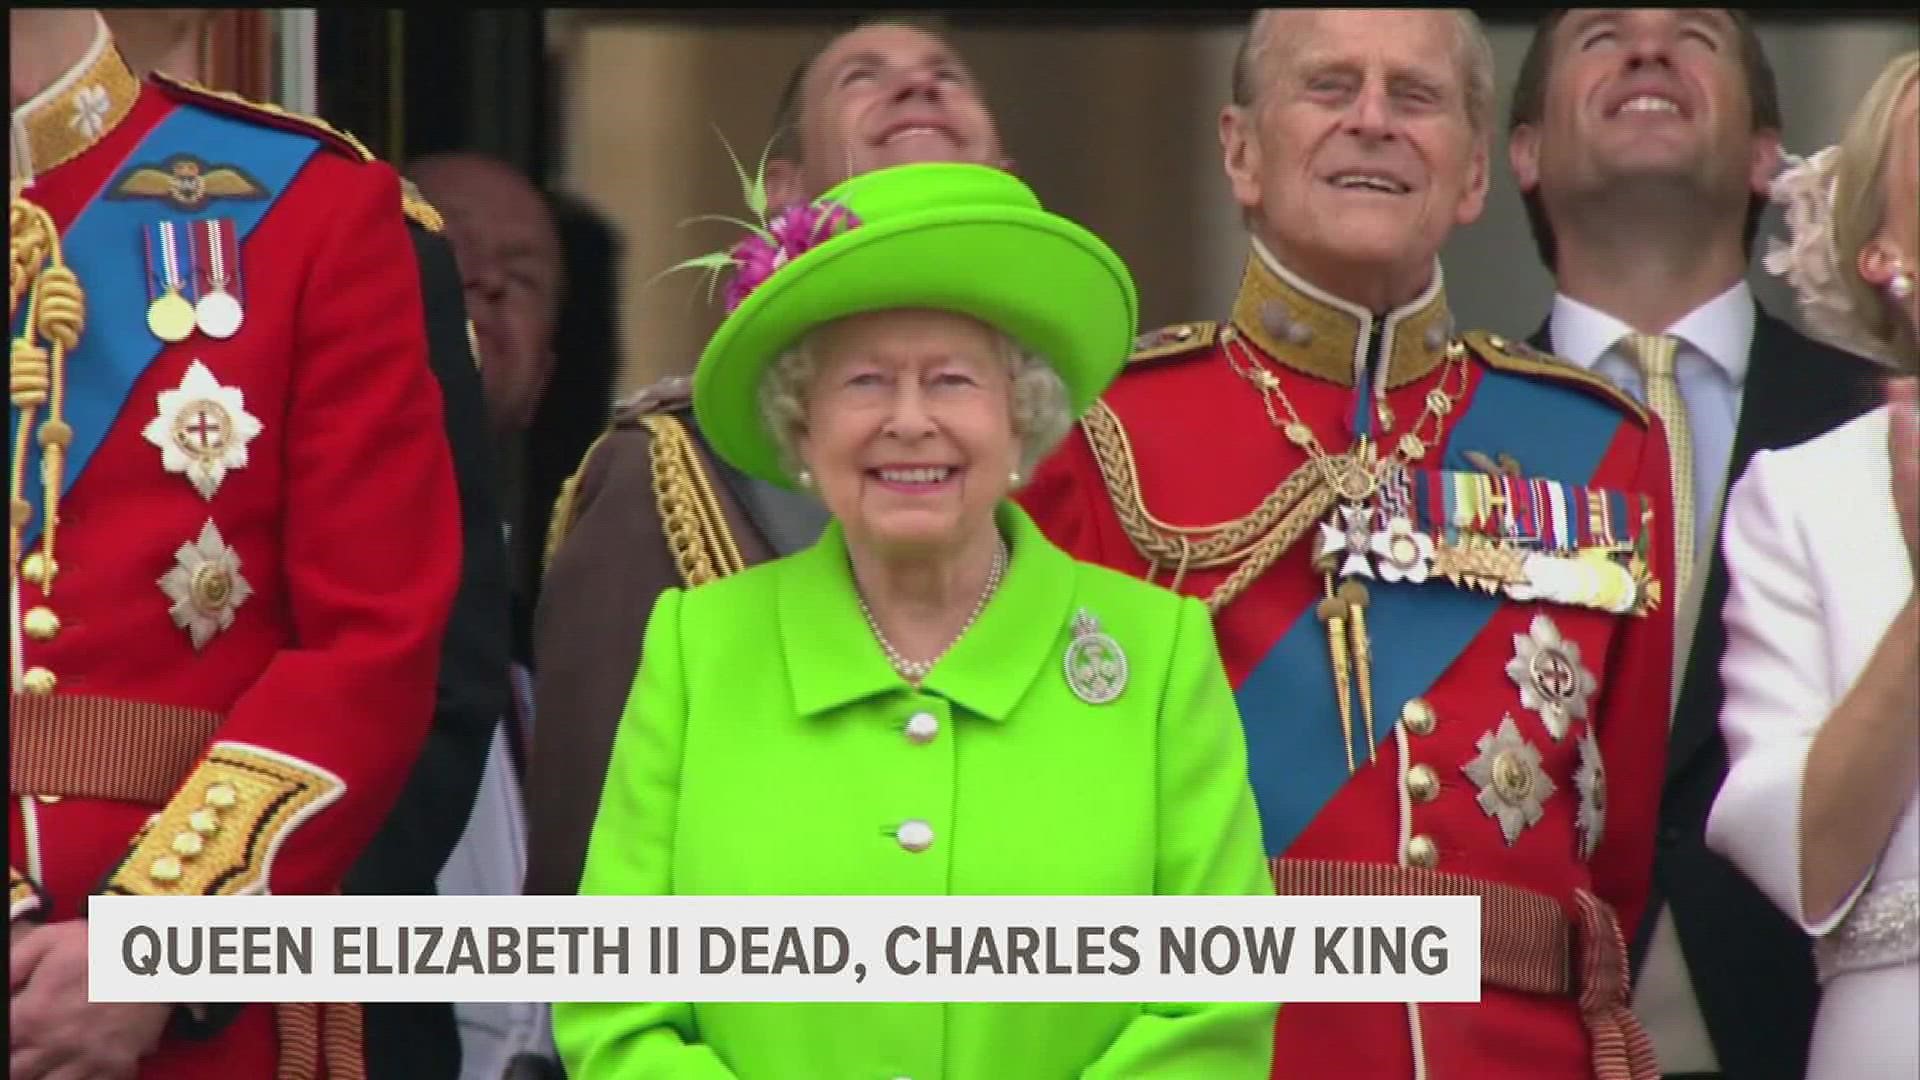 King Charles III is addressing the nation and commonwealth today.